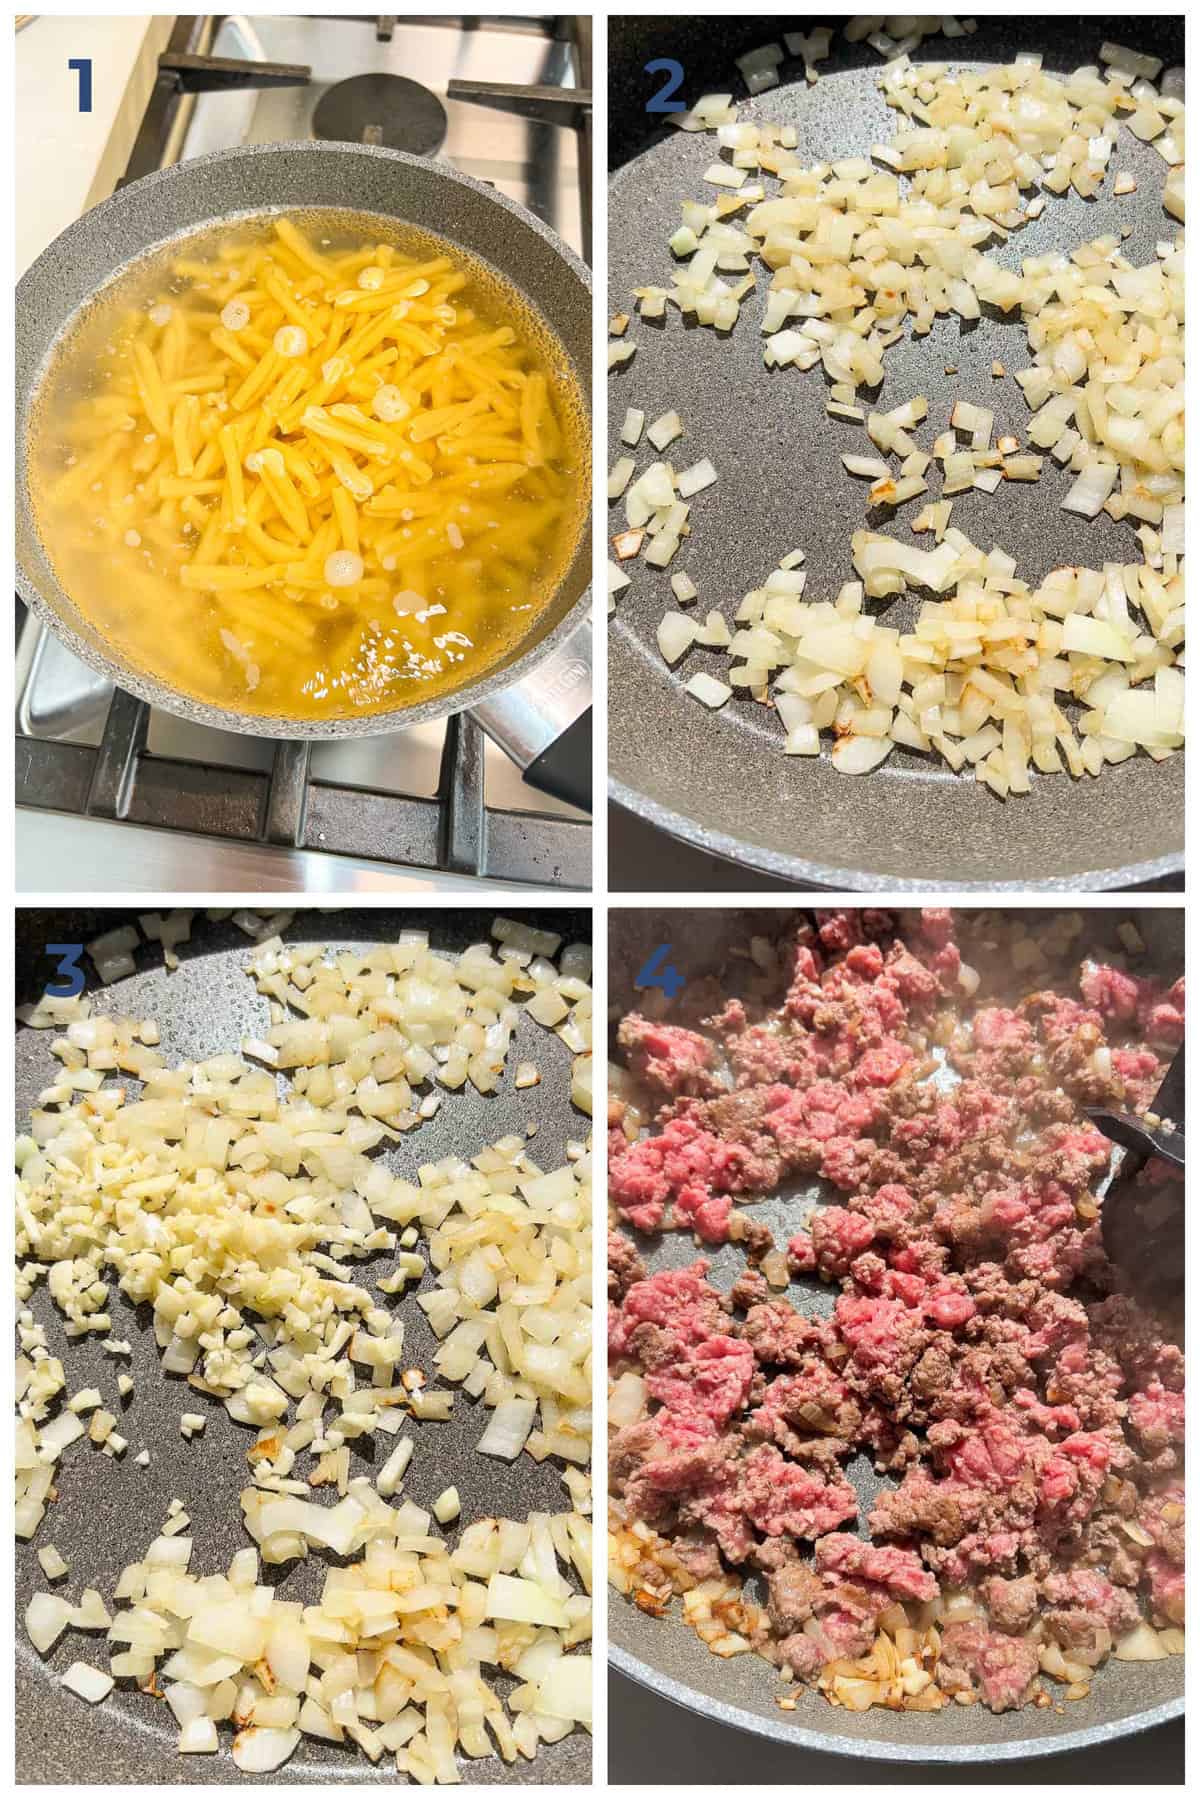 Step by step photo directions for how to make a homemade version of stroganoff hamburger helper.